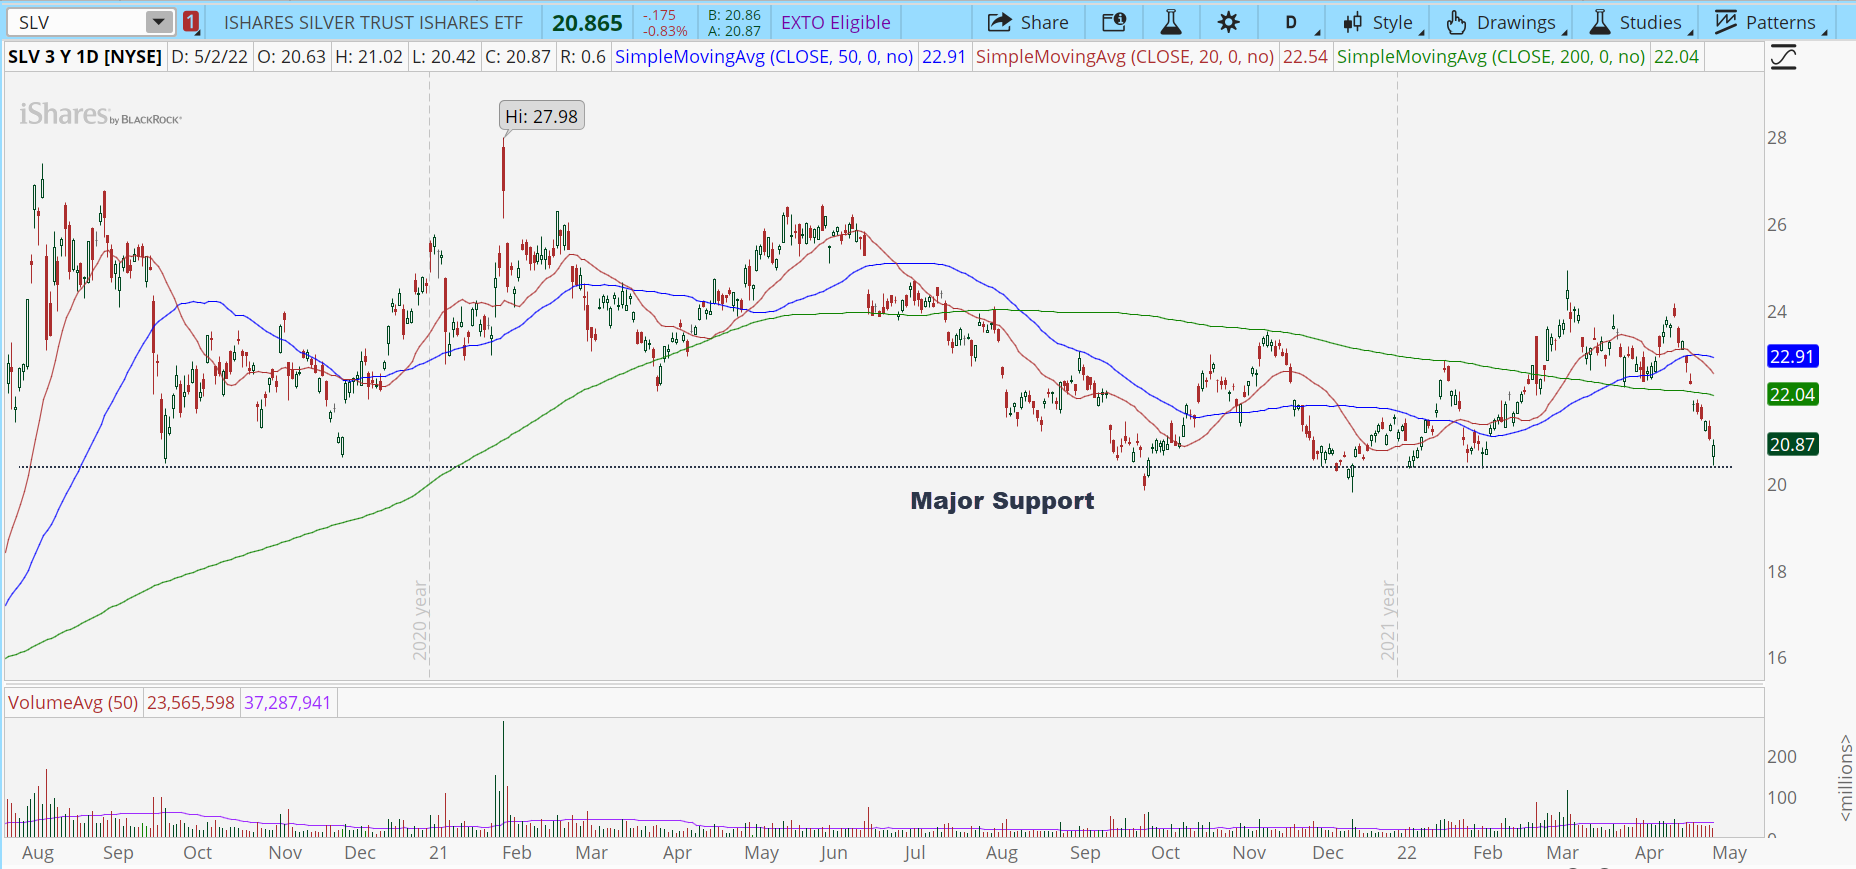 iShares Silver Trust (SLV) stock chart with major support level.